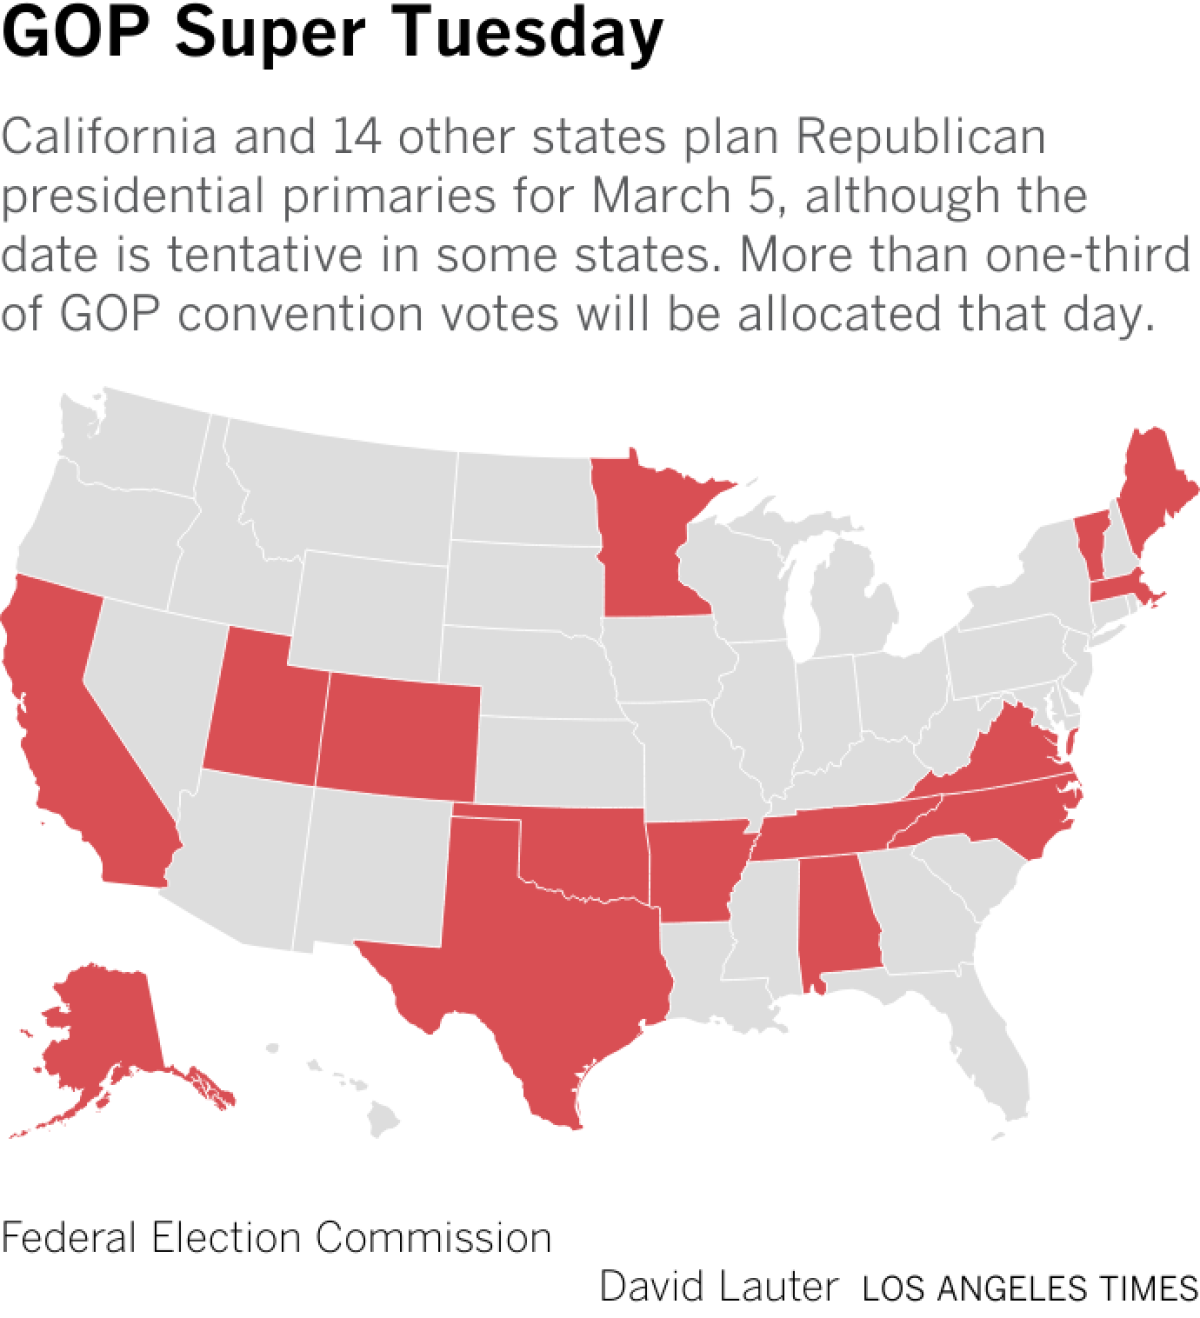 Map showing California and 14 other states plan Republican presidential primaries for March 5, although the date is tentative in some states. More than one-third of GOP convention votes will be allocated that day.